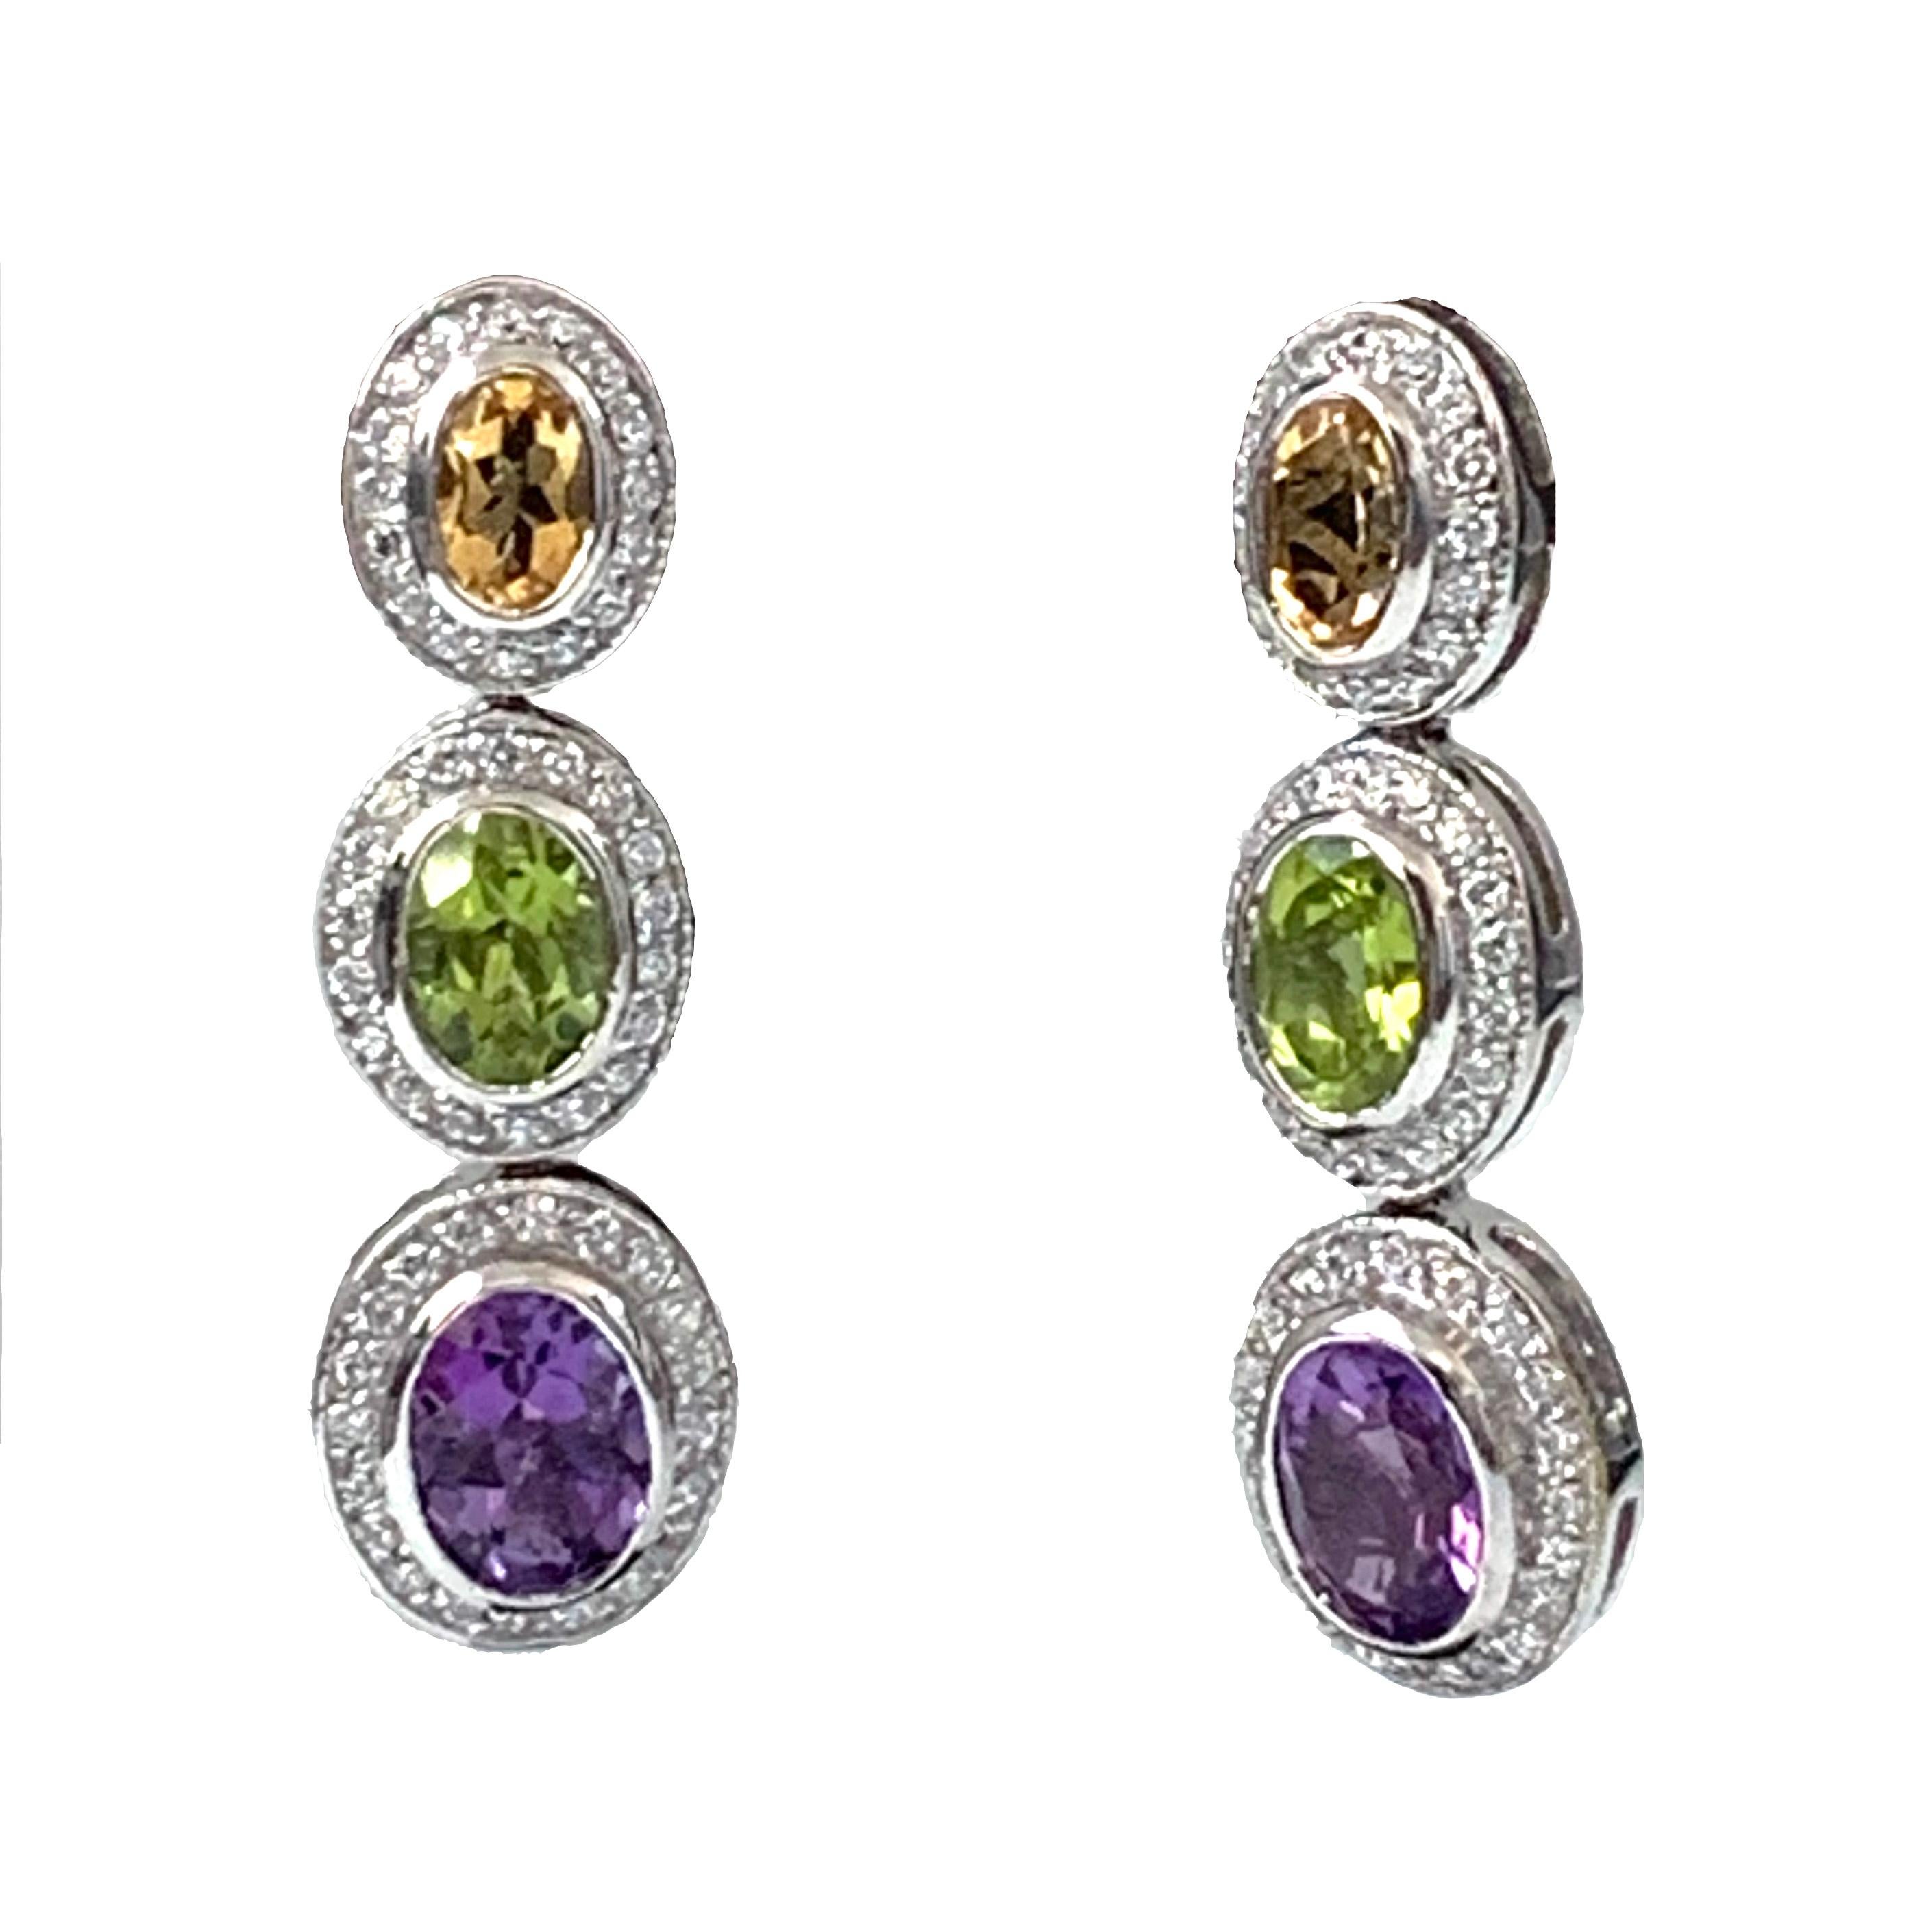 Beautiful multicolor oval gemstones (Citrine, Peridot, and Amethyst) adorned with round Cubic Zirconia drop earrings. Platinum rhodium finished. Straight post. Marked: Jarin

1.5